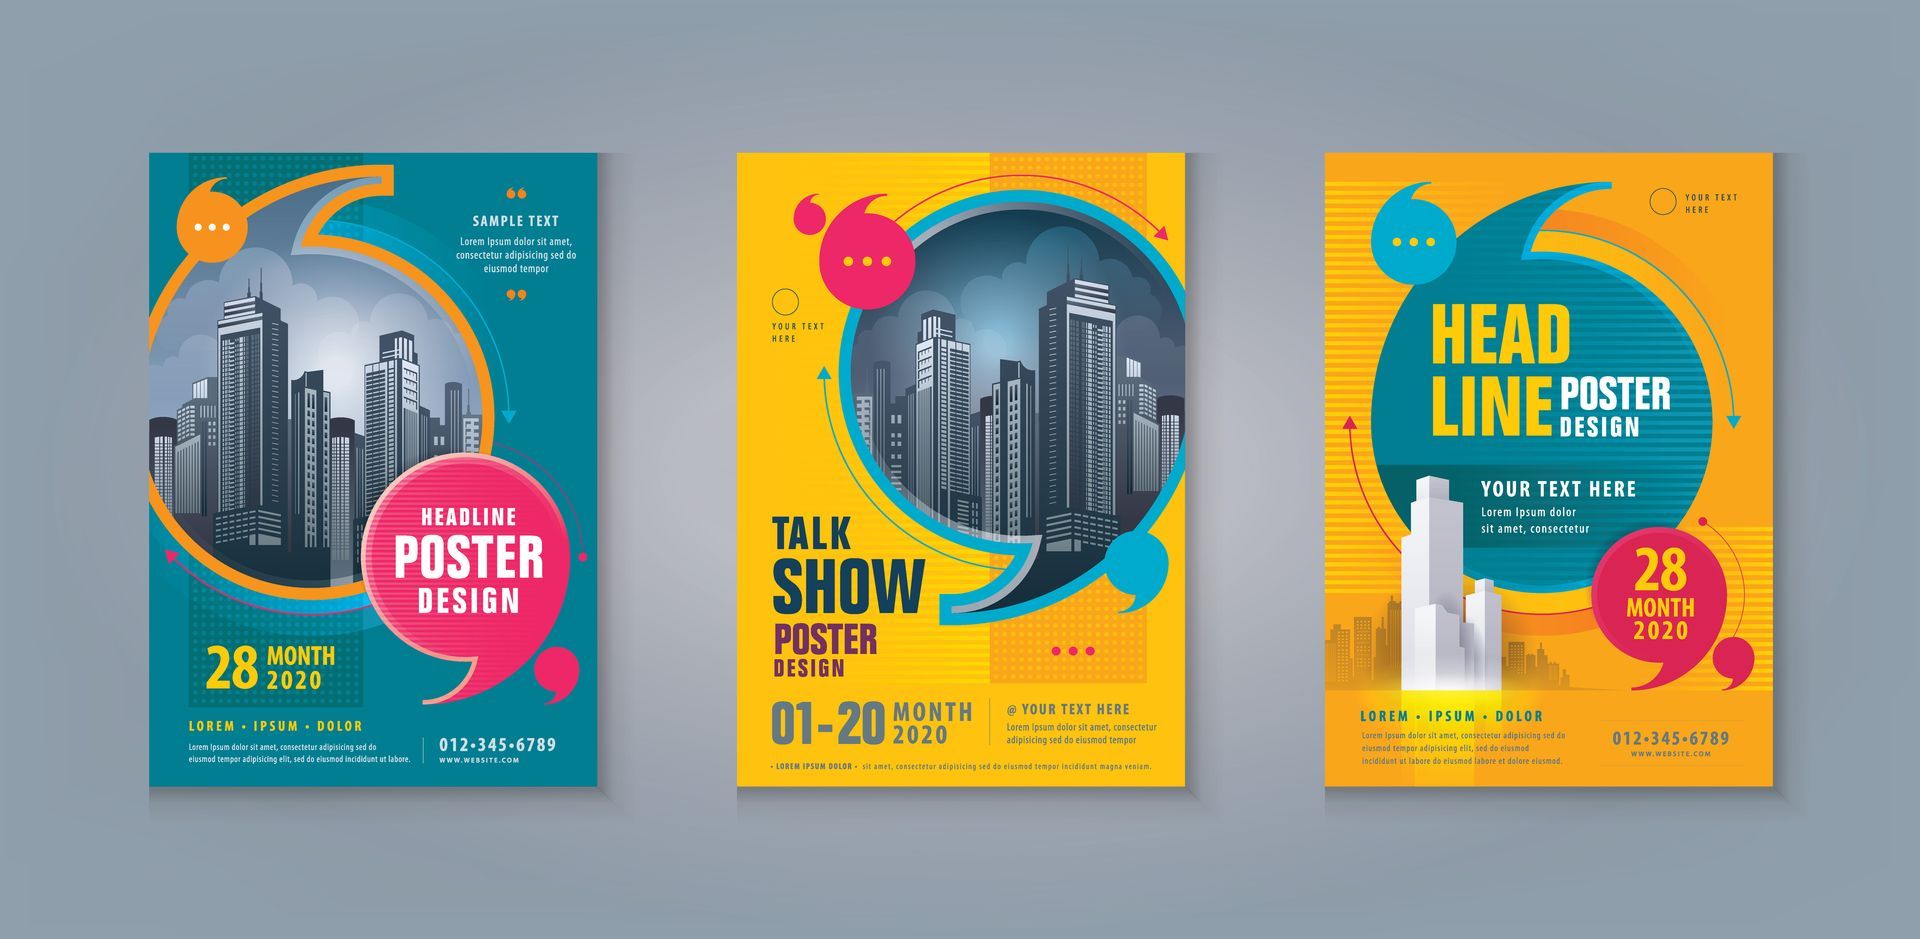 Custom Posters For Conferences & Trade Shows In Orange County California